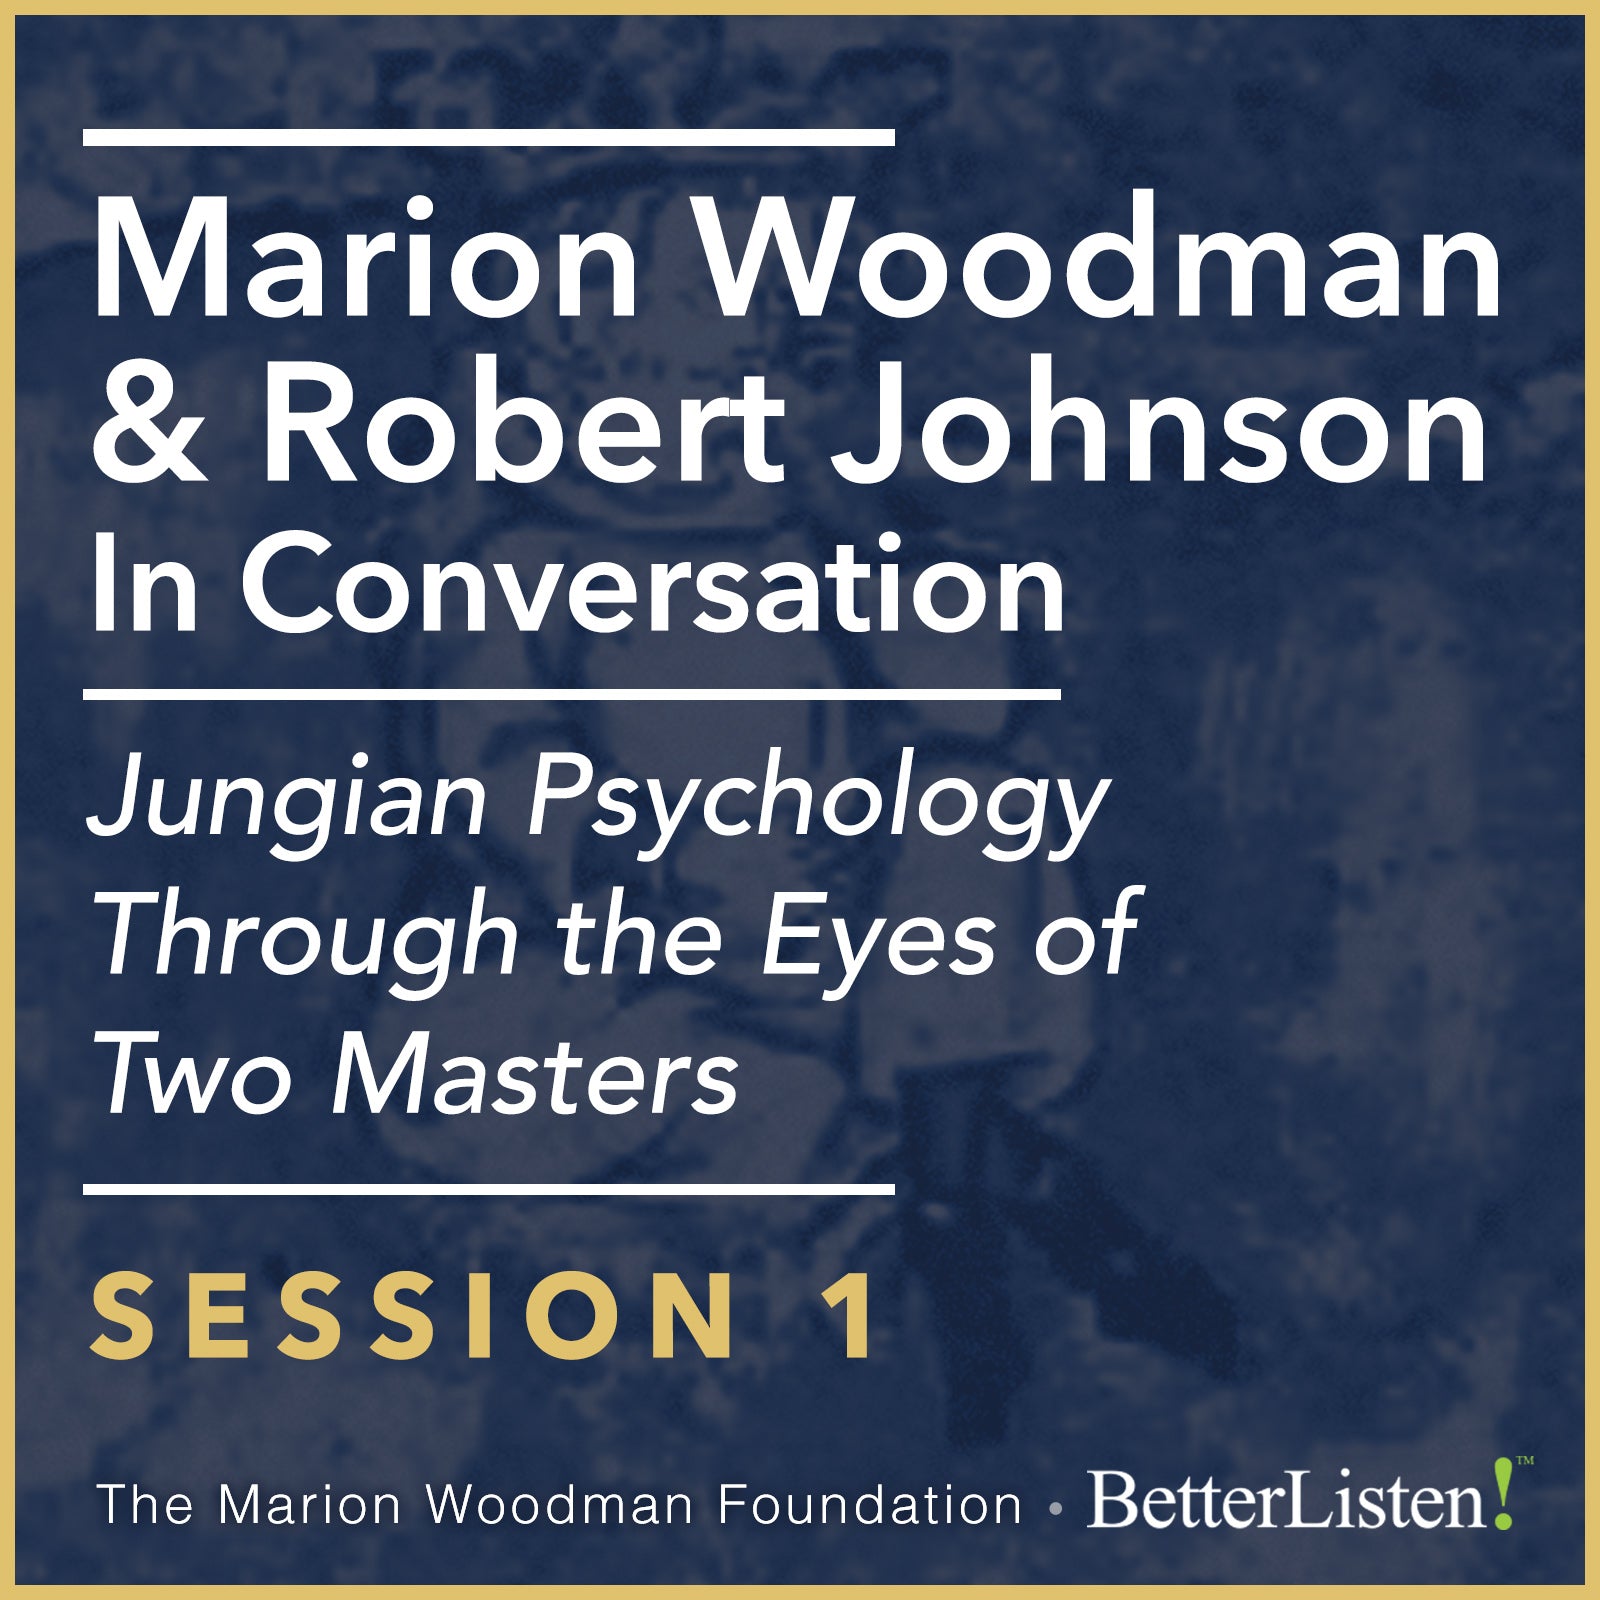 Marion Woodman & Robert Johnson In Conversation: SESSION 1 - Video, Jungian Psychology Through The Eyes of Two Masters